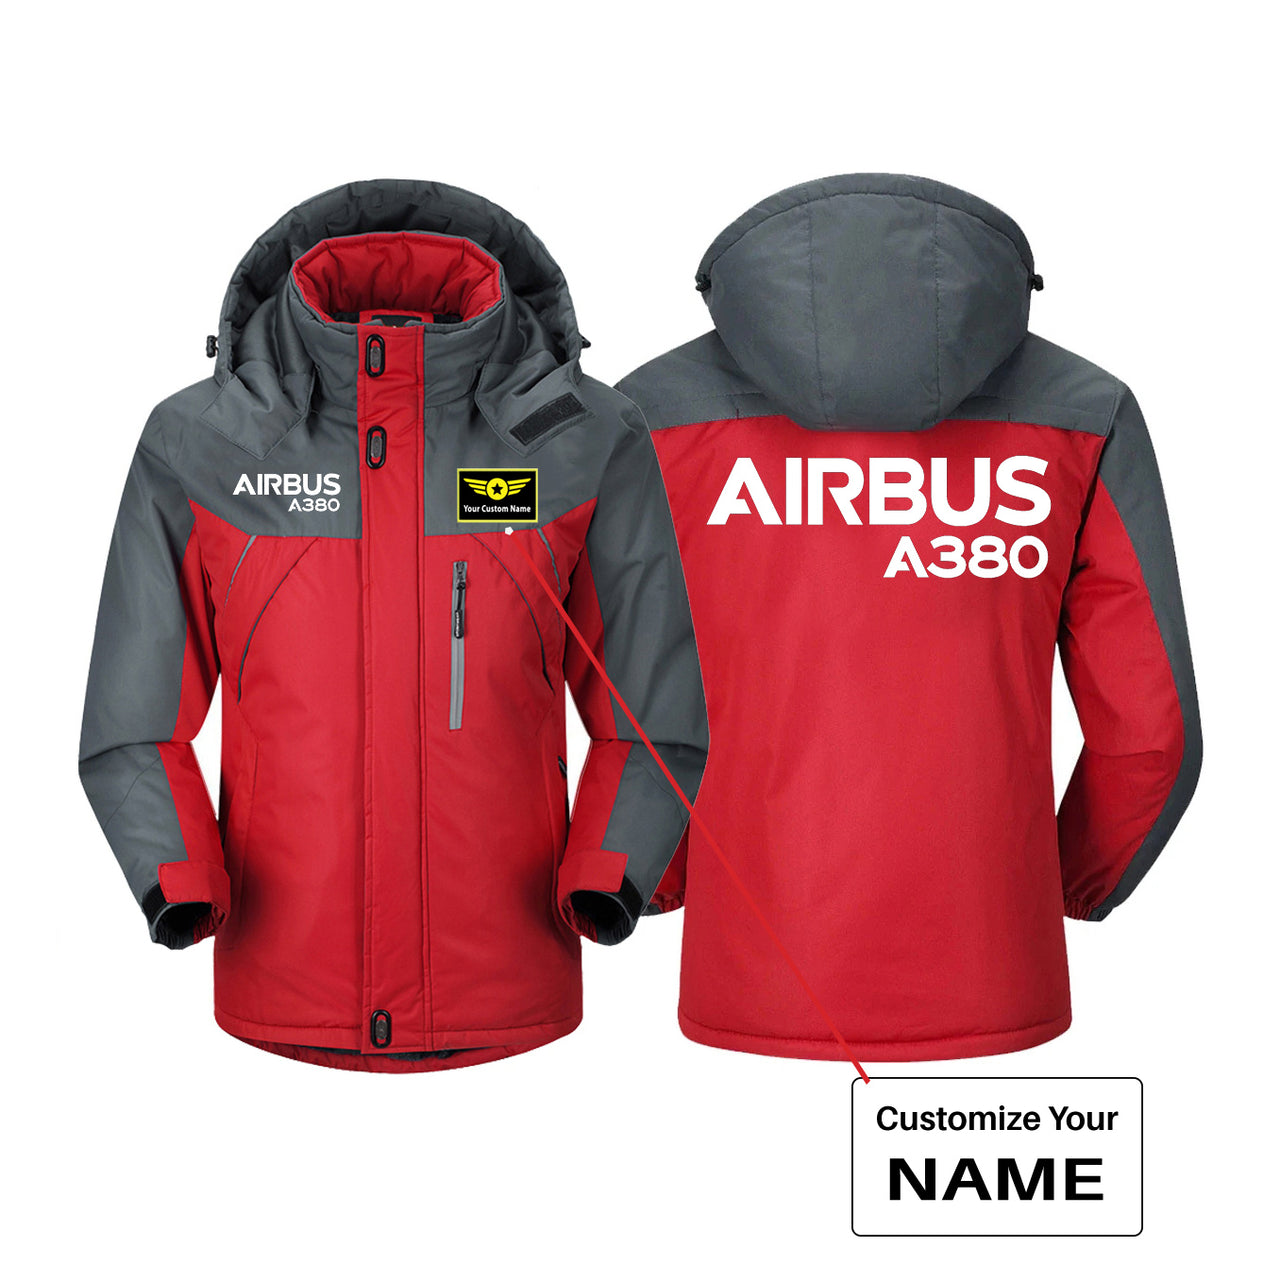 Airbus A380 & Text Designed Thick Winter Jackets